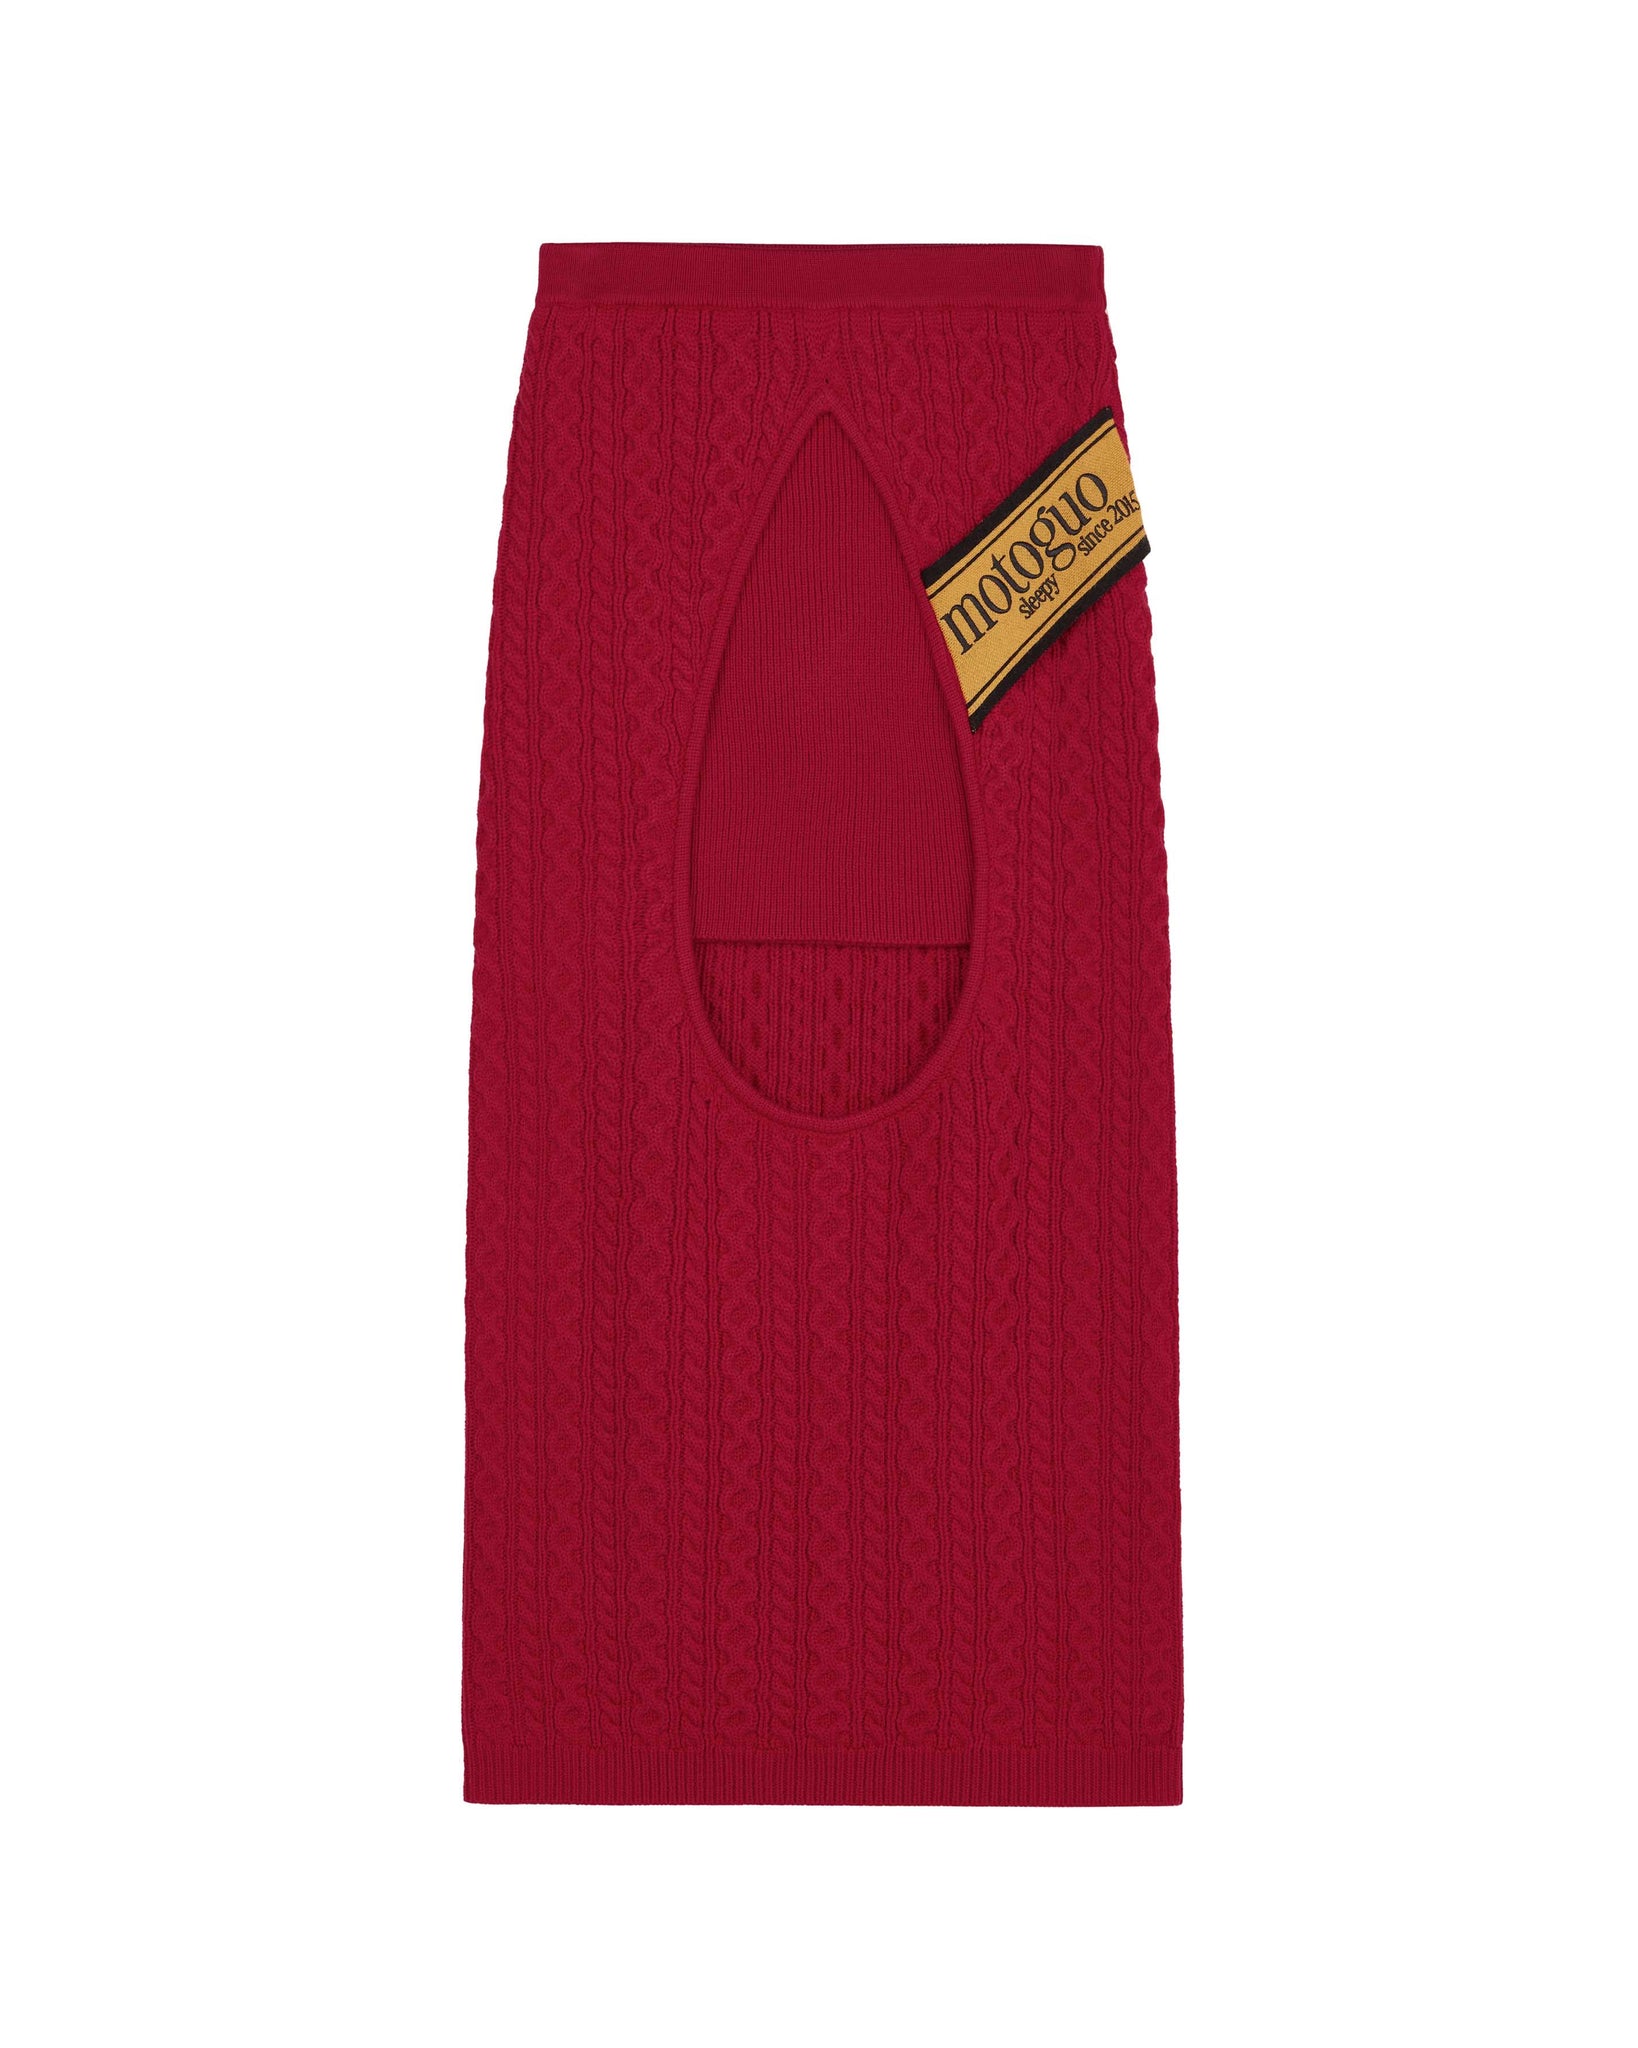 Load image into Gallery viewer, Sleep Matters Club Skirt (Crimson Red)
